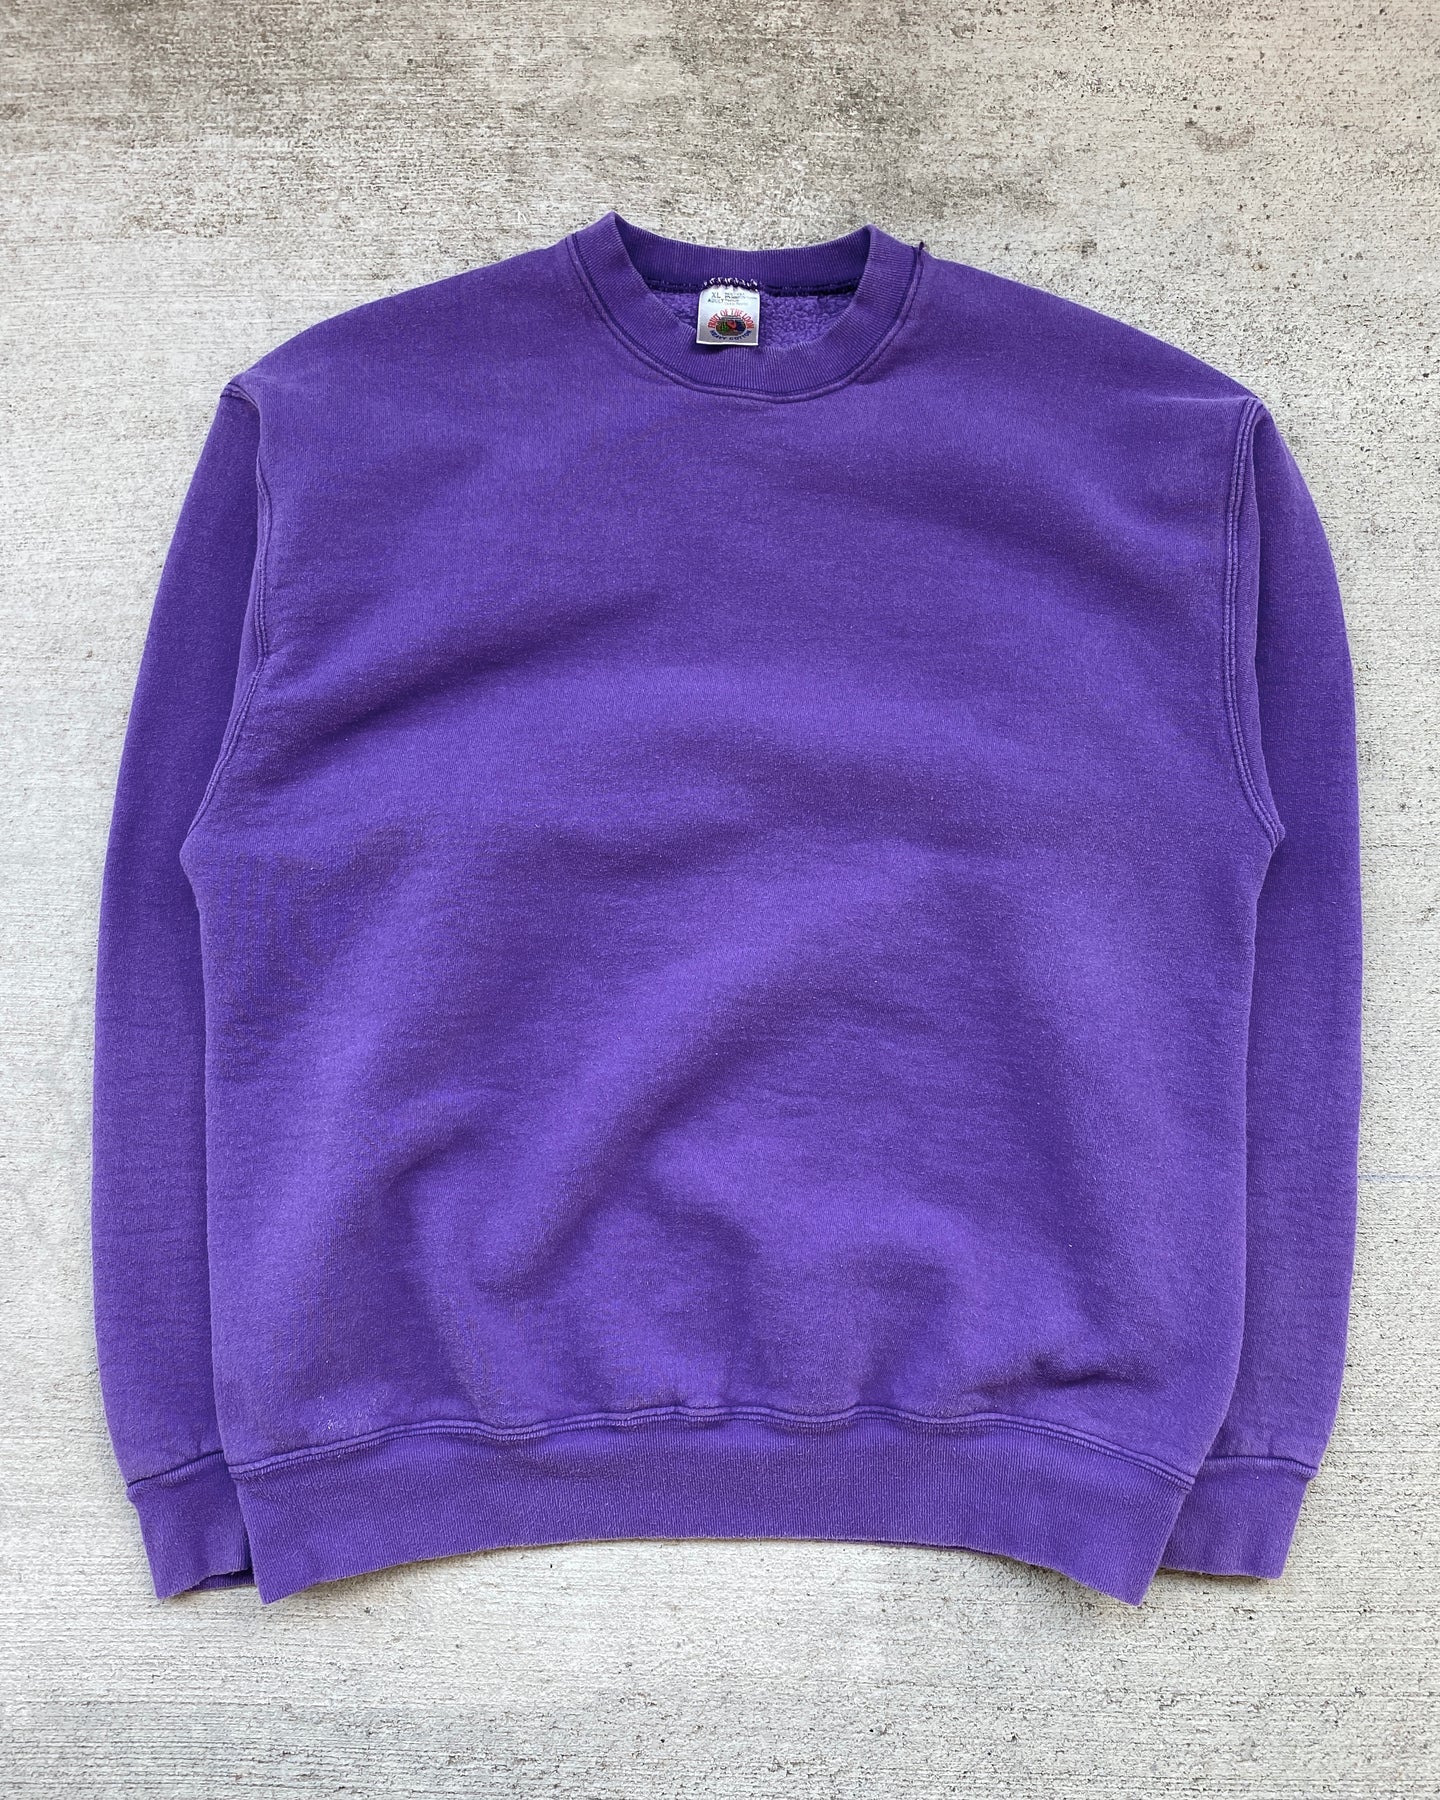 1990s Fruit of the Loom Violet Blank Crewneck - Size X-Large